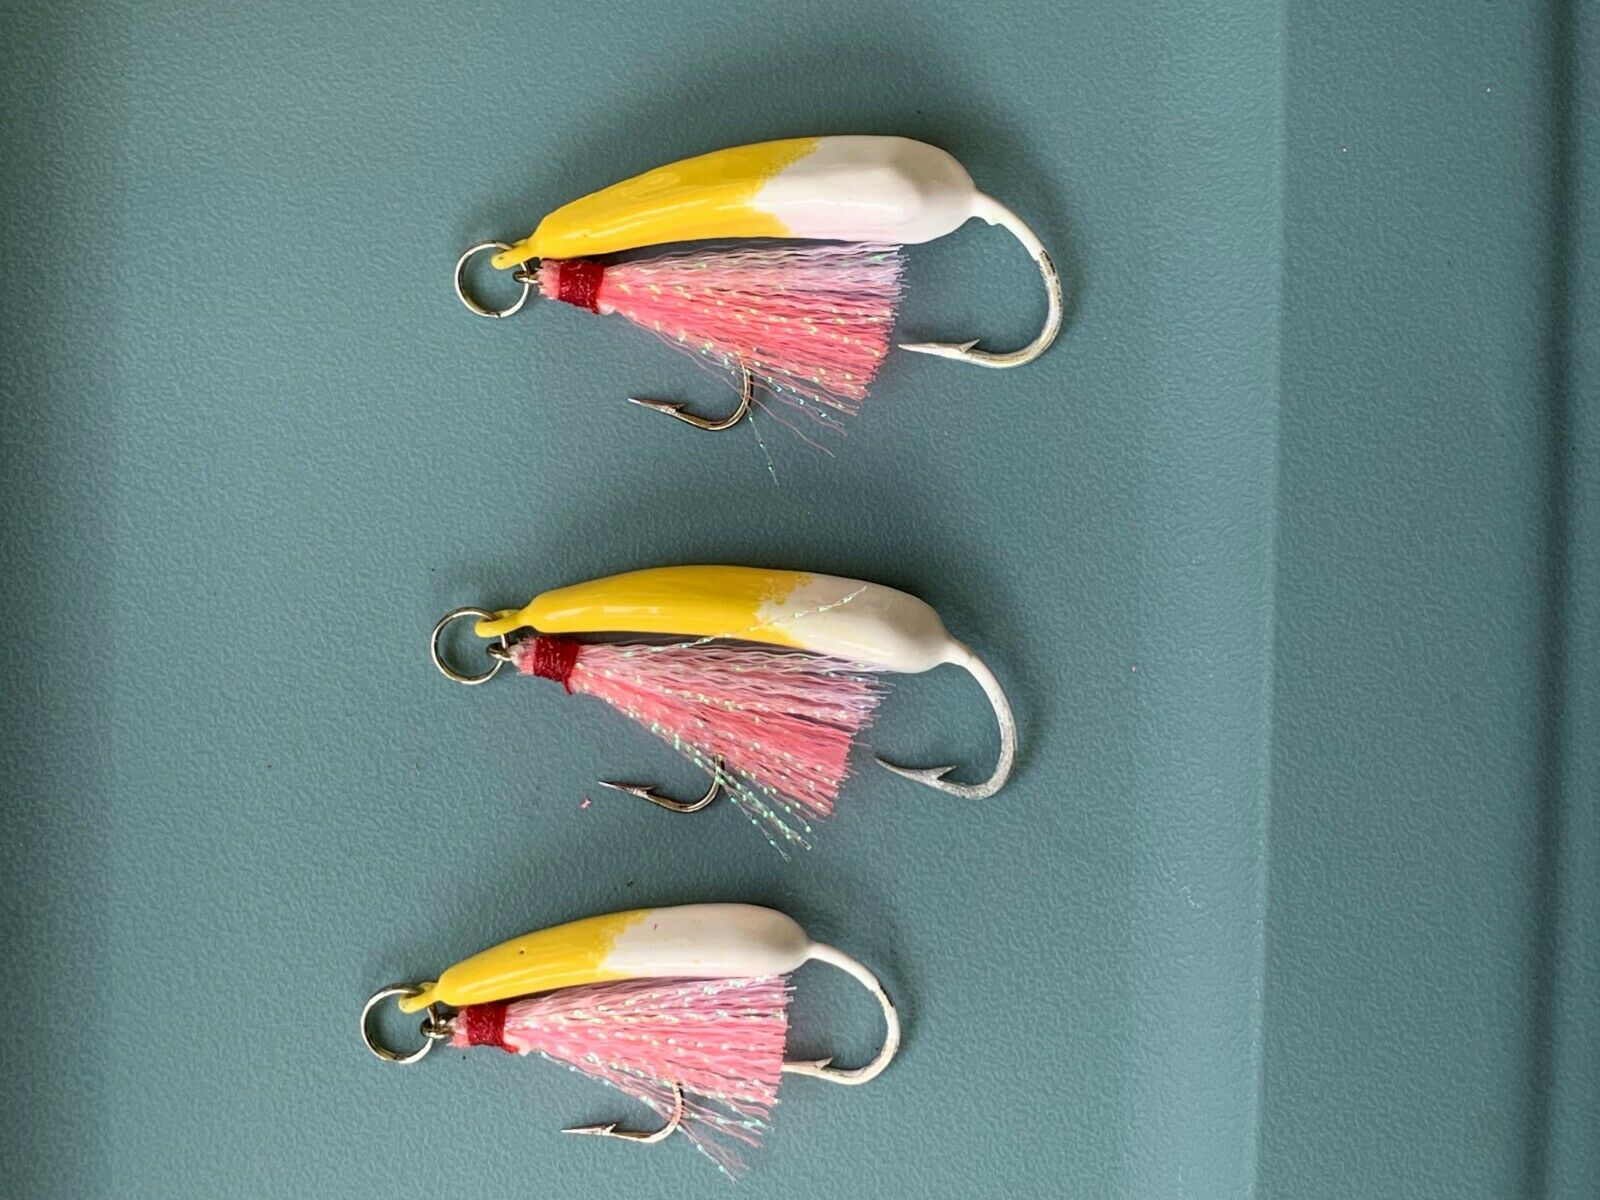 Ringed Pompano Jig B. Yellow/White w/ Pink Teaser